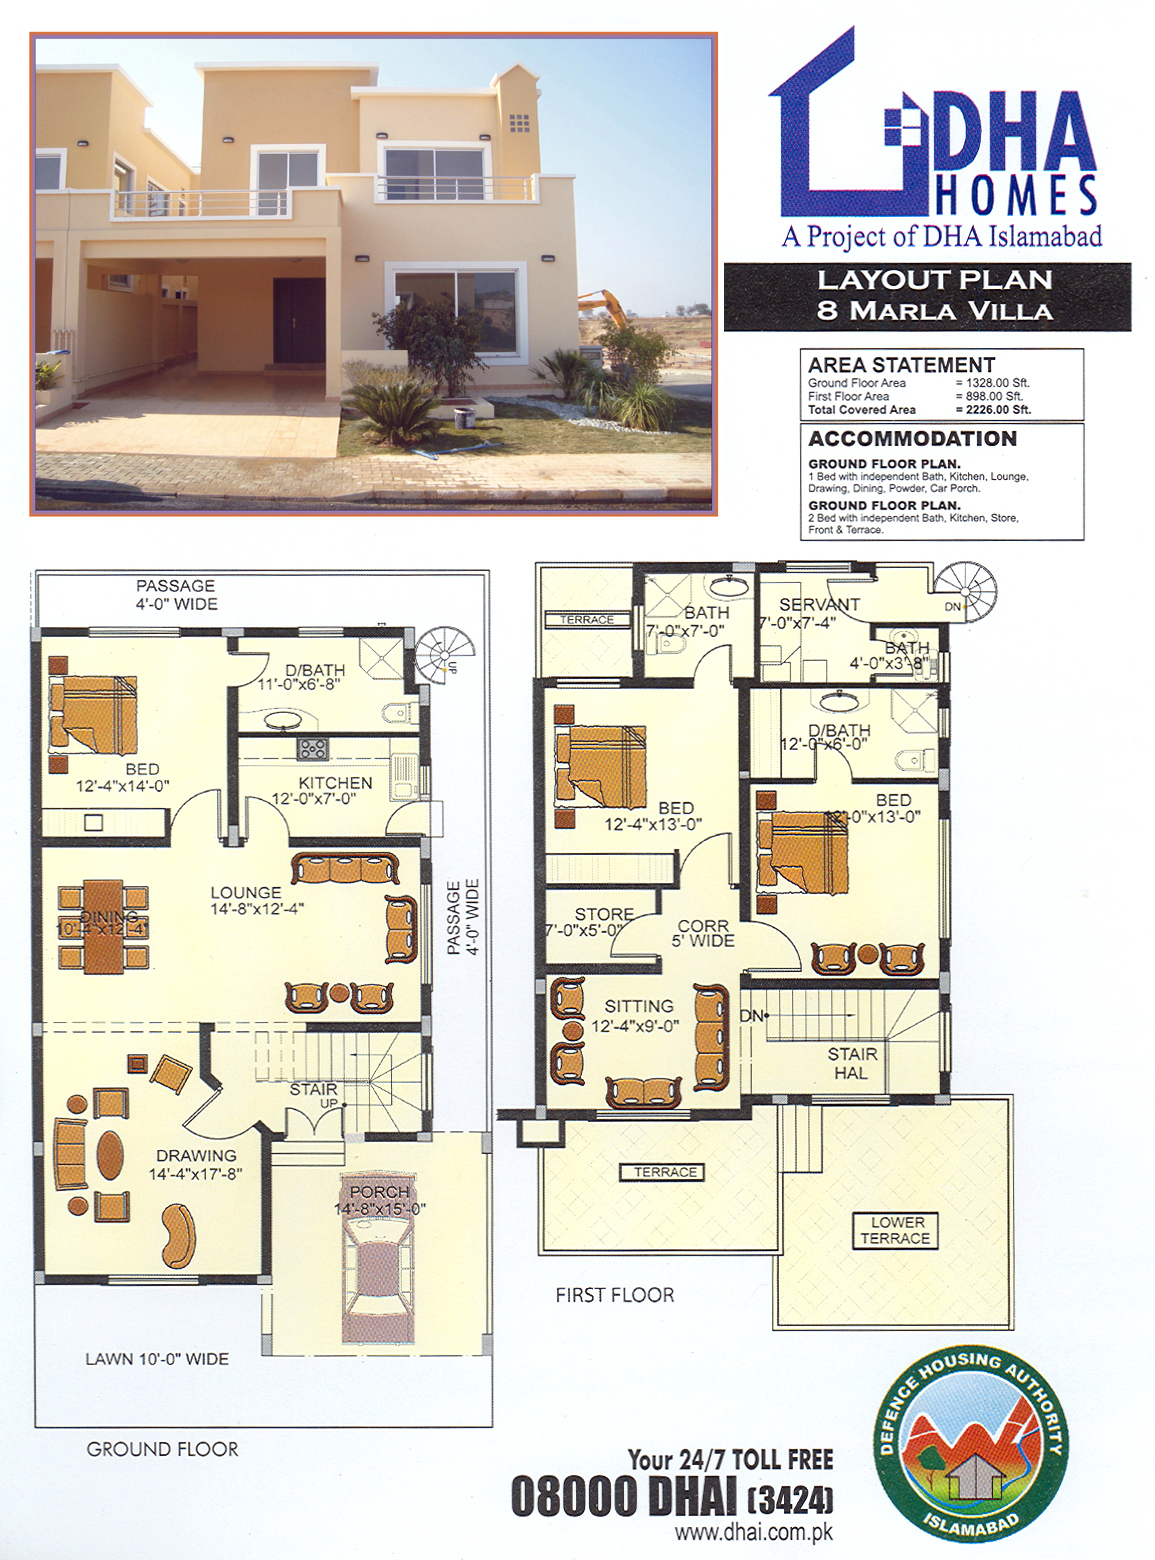 DHA Homes Islamabad Location, Layout Floor Plan and Prices